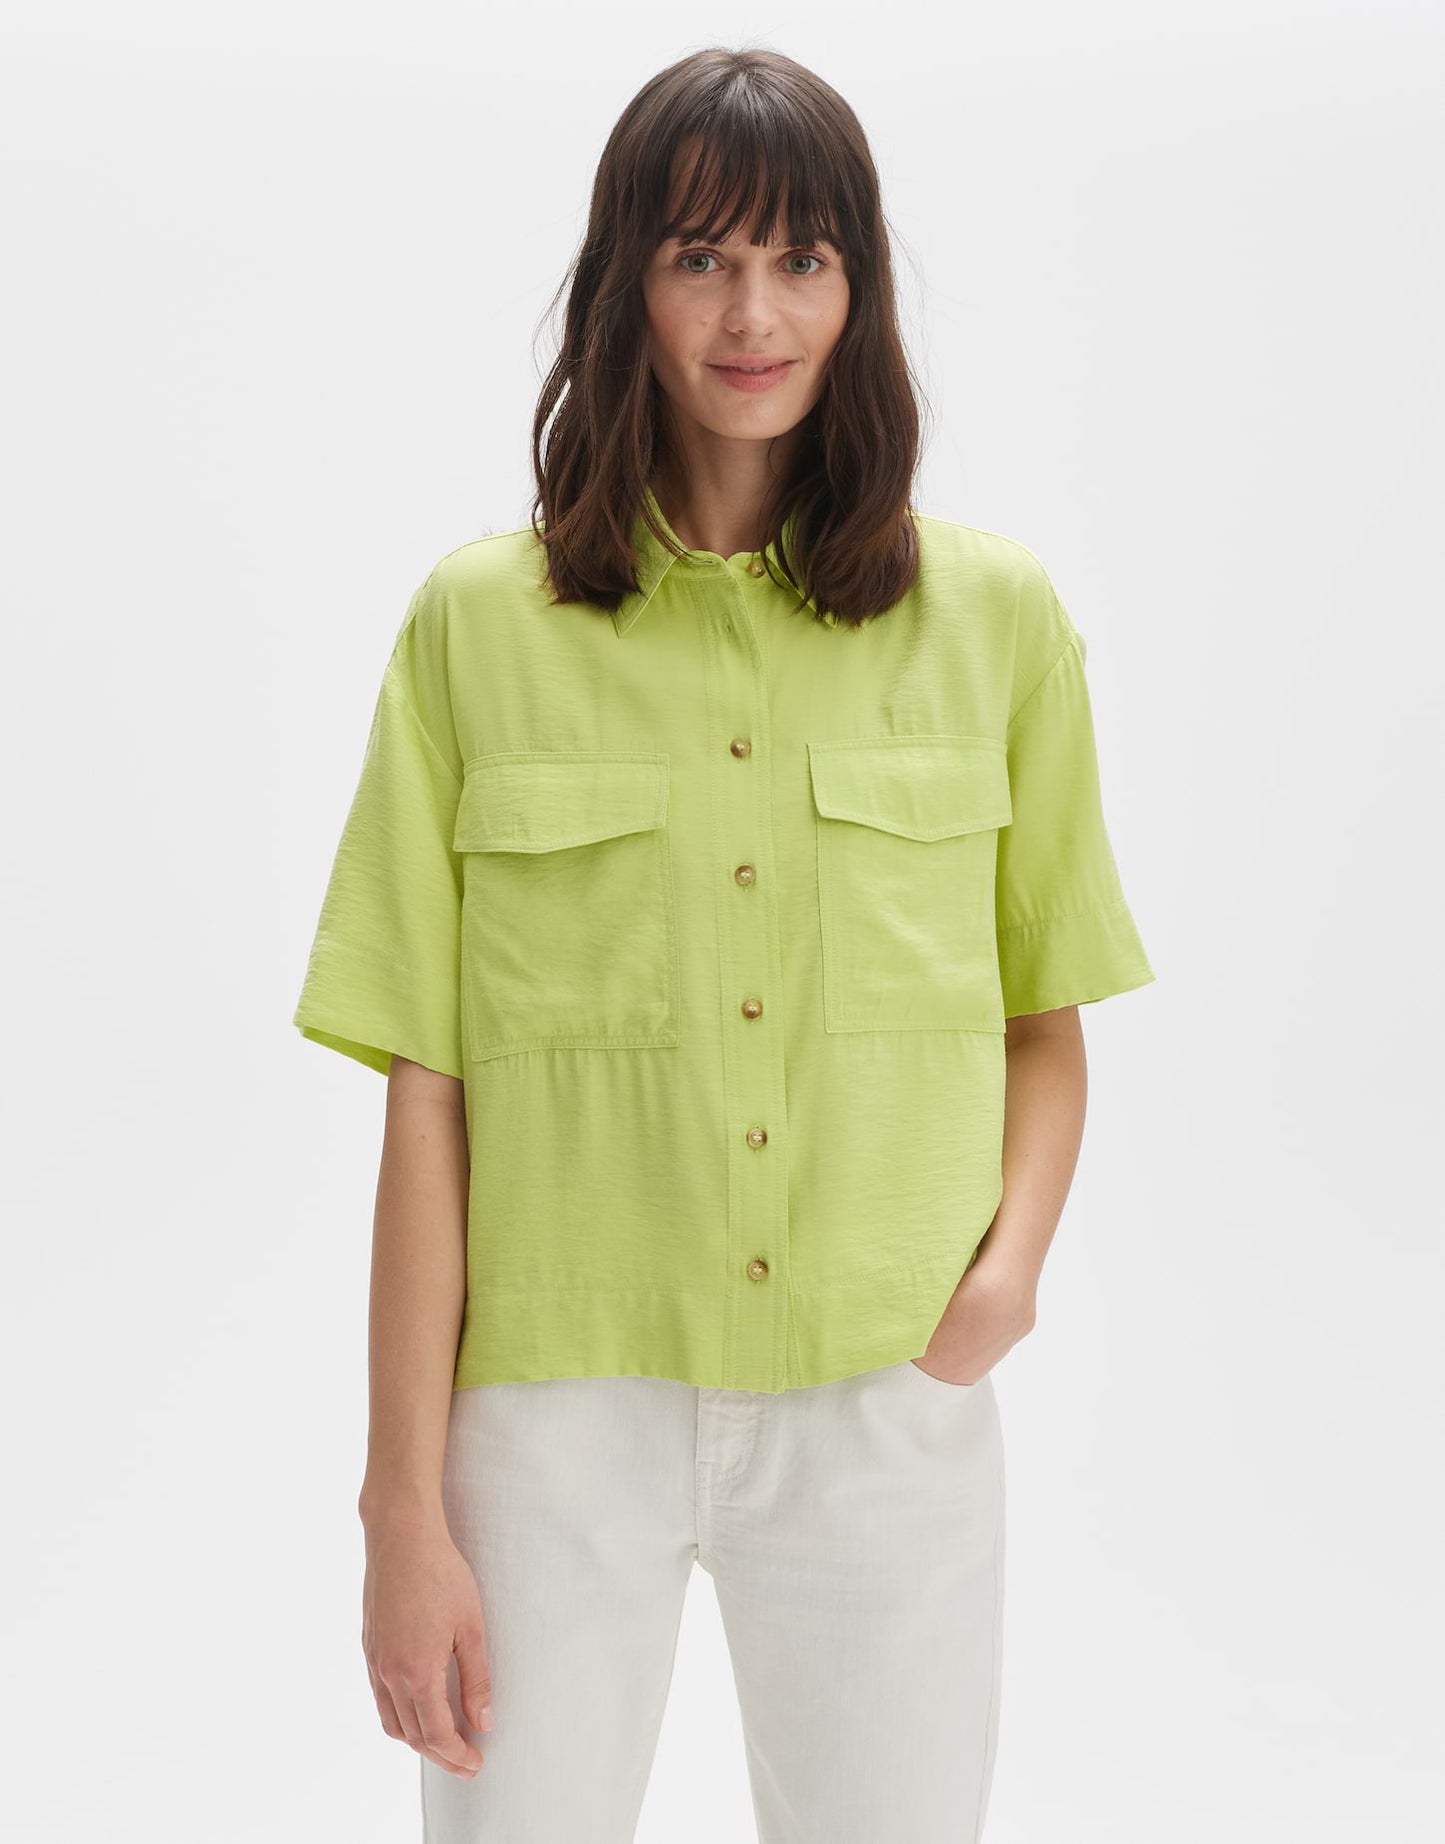 30027 lime green;2